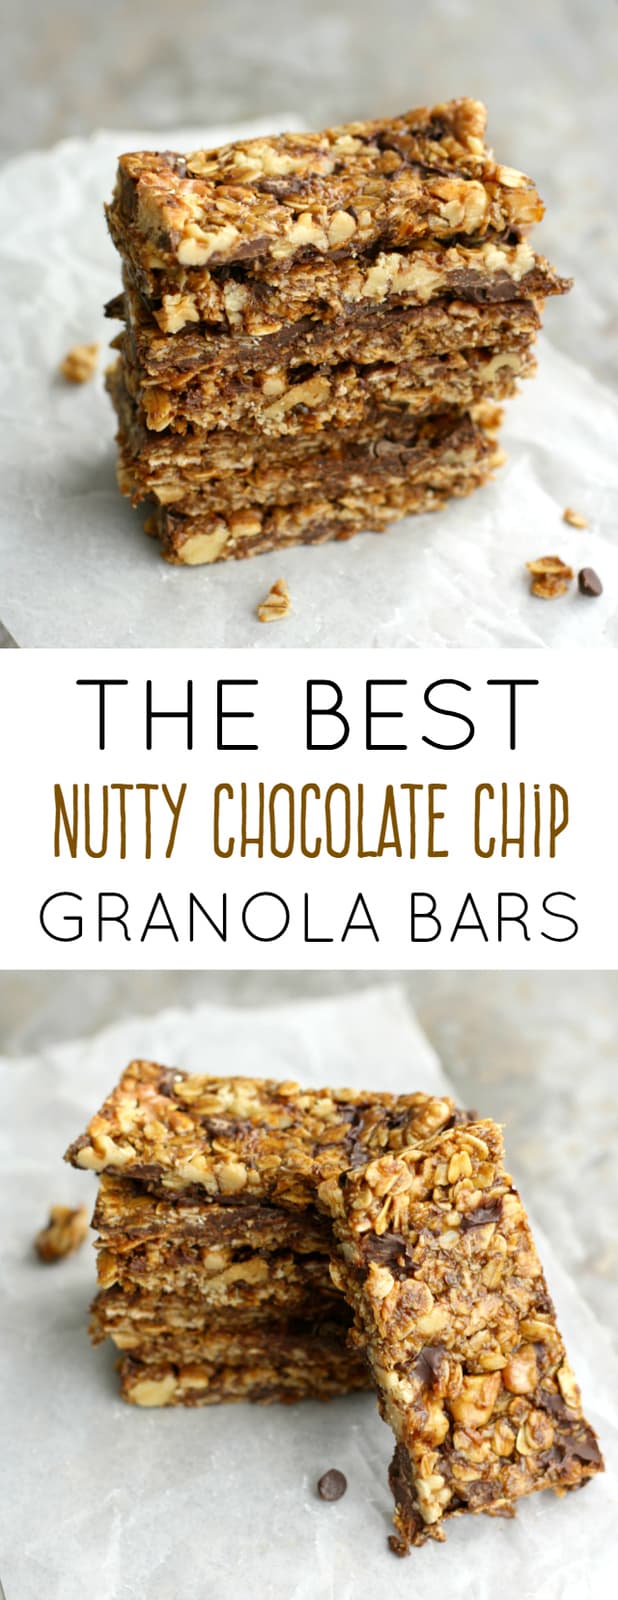 These nutty chocolate chip granola bars are SO good, you'll never want a store bought granola bar again!